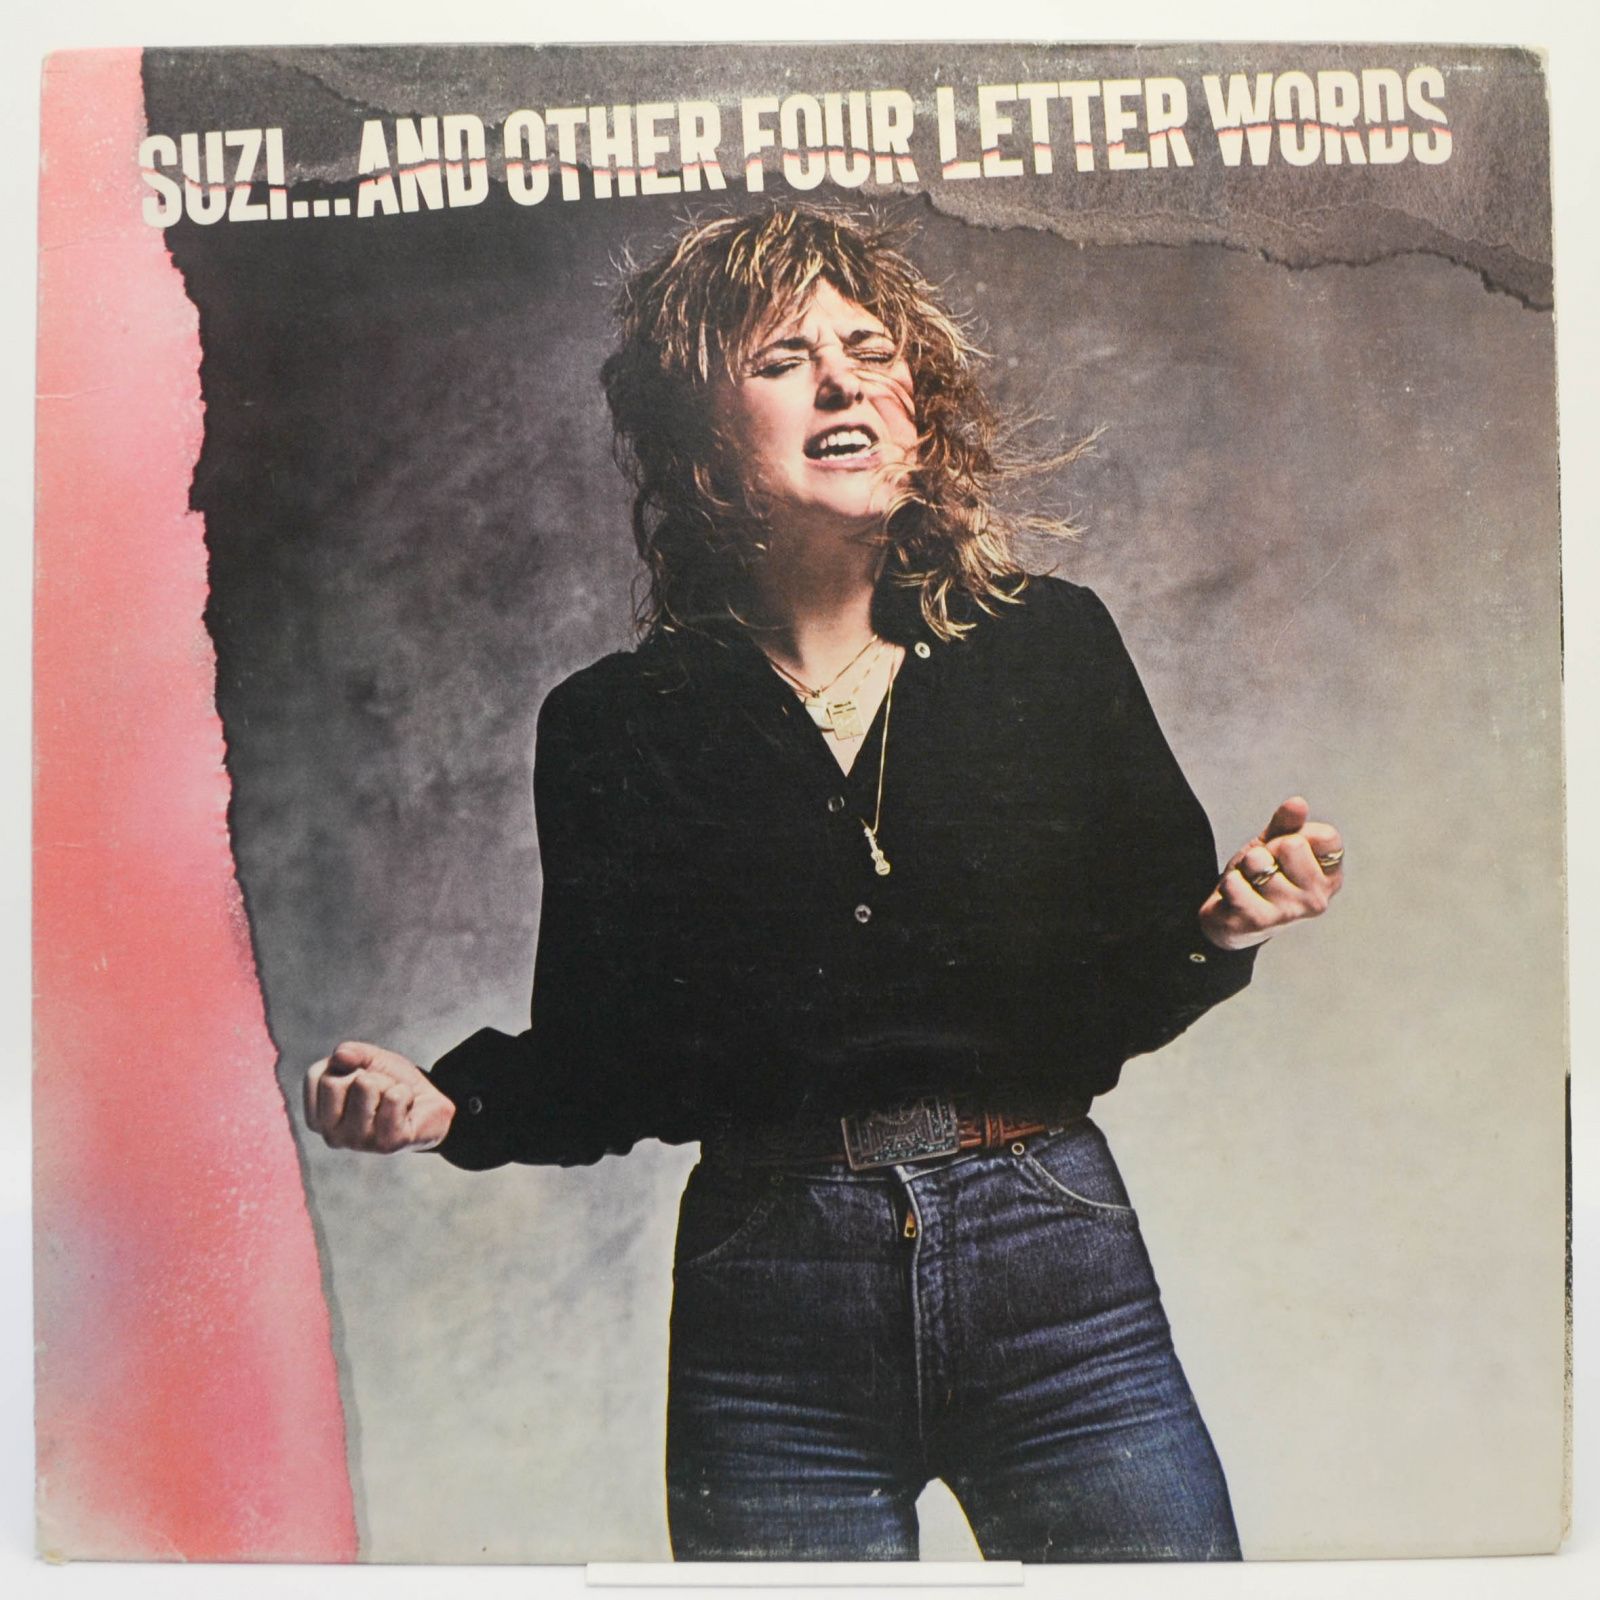 Suzi... And Other Four Letter Words, 1979